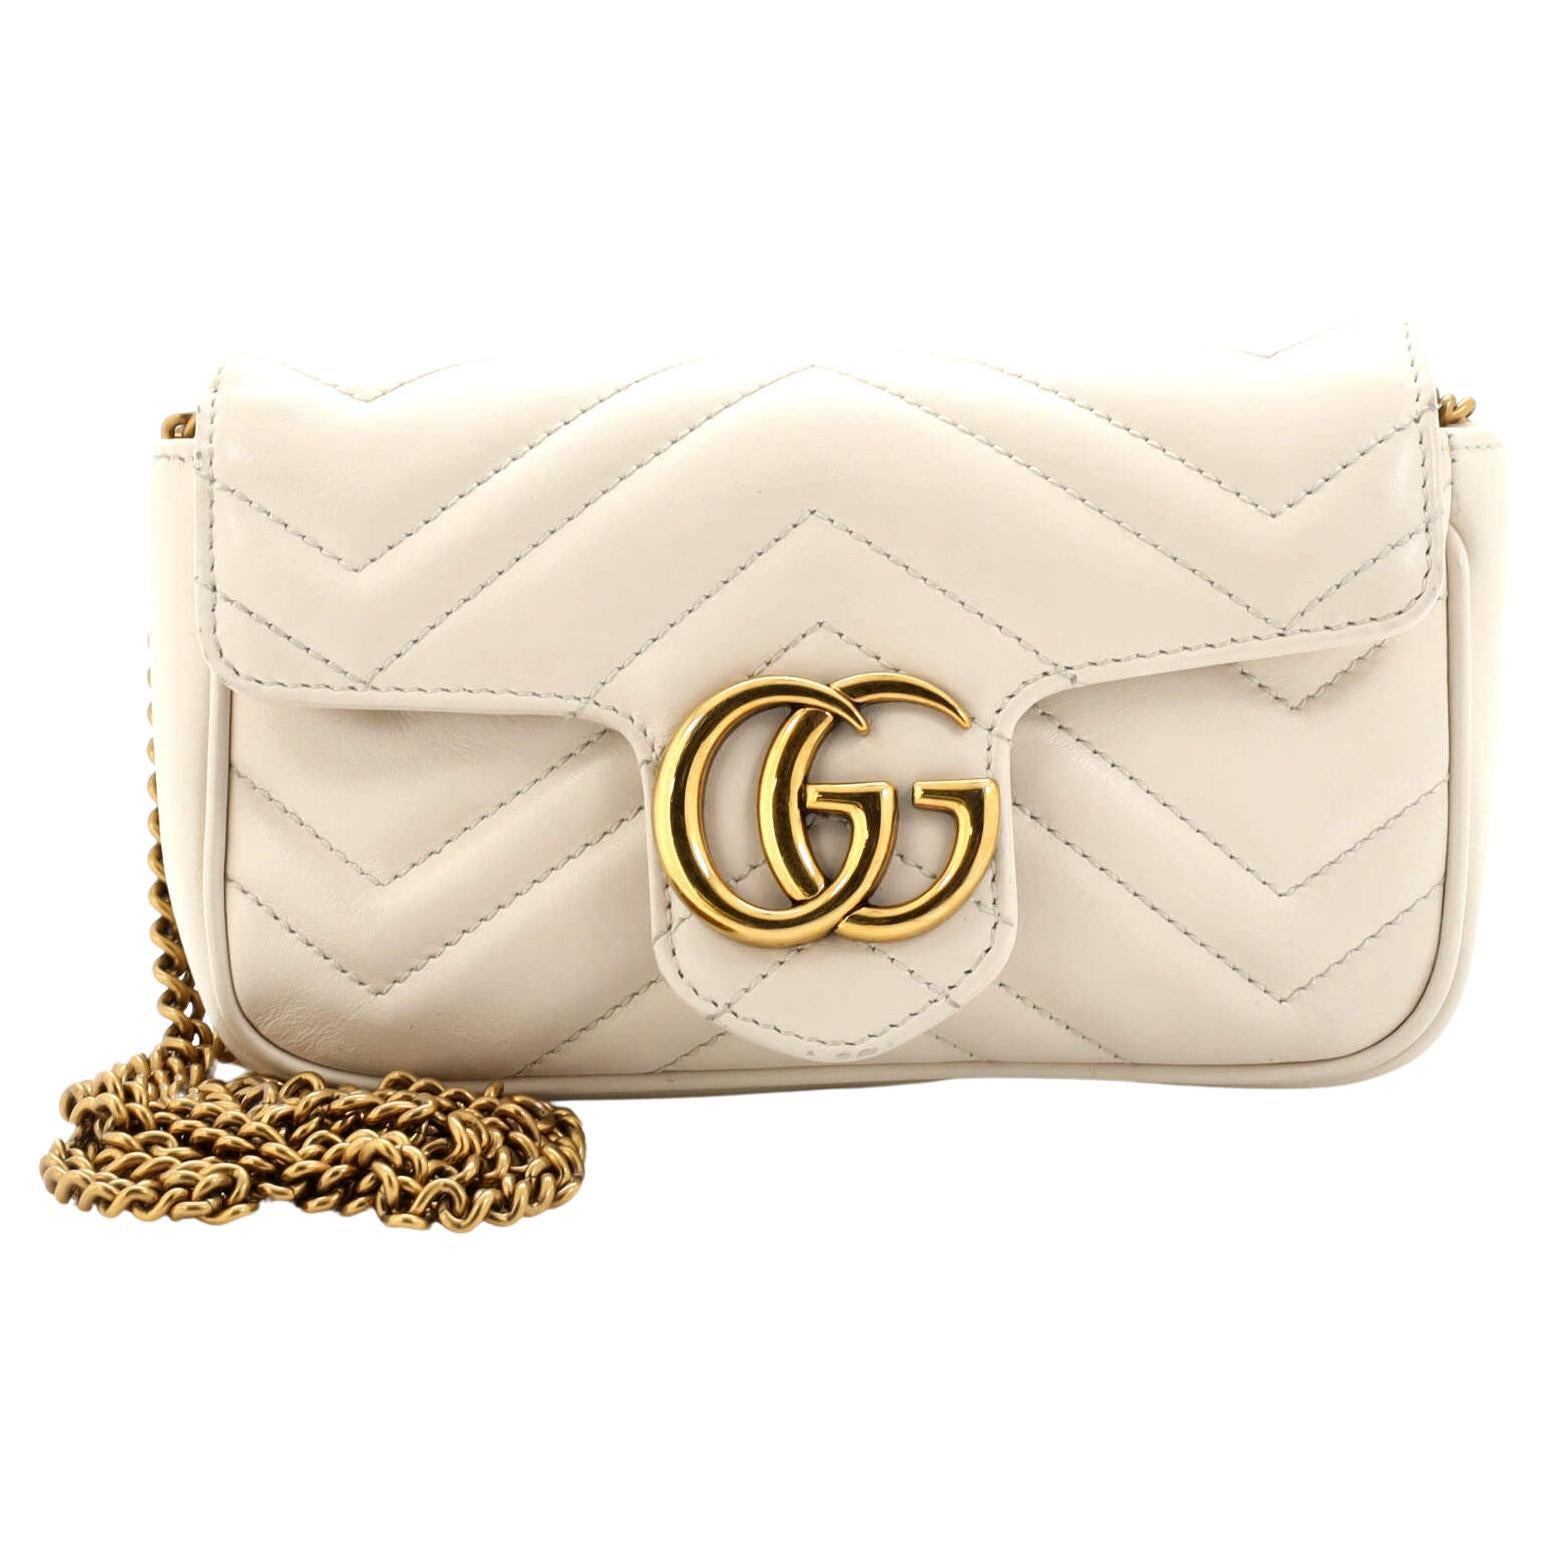 Gucci, Dionysus Mini Leather-trimmed Printed Coated-canvas Tote, Neutrals, One size